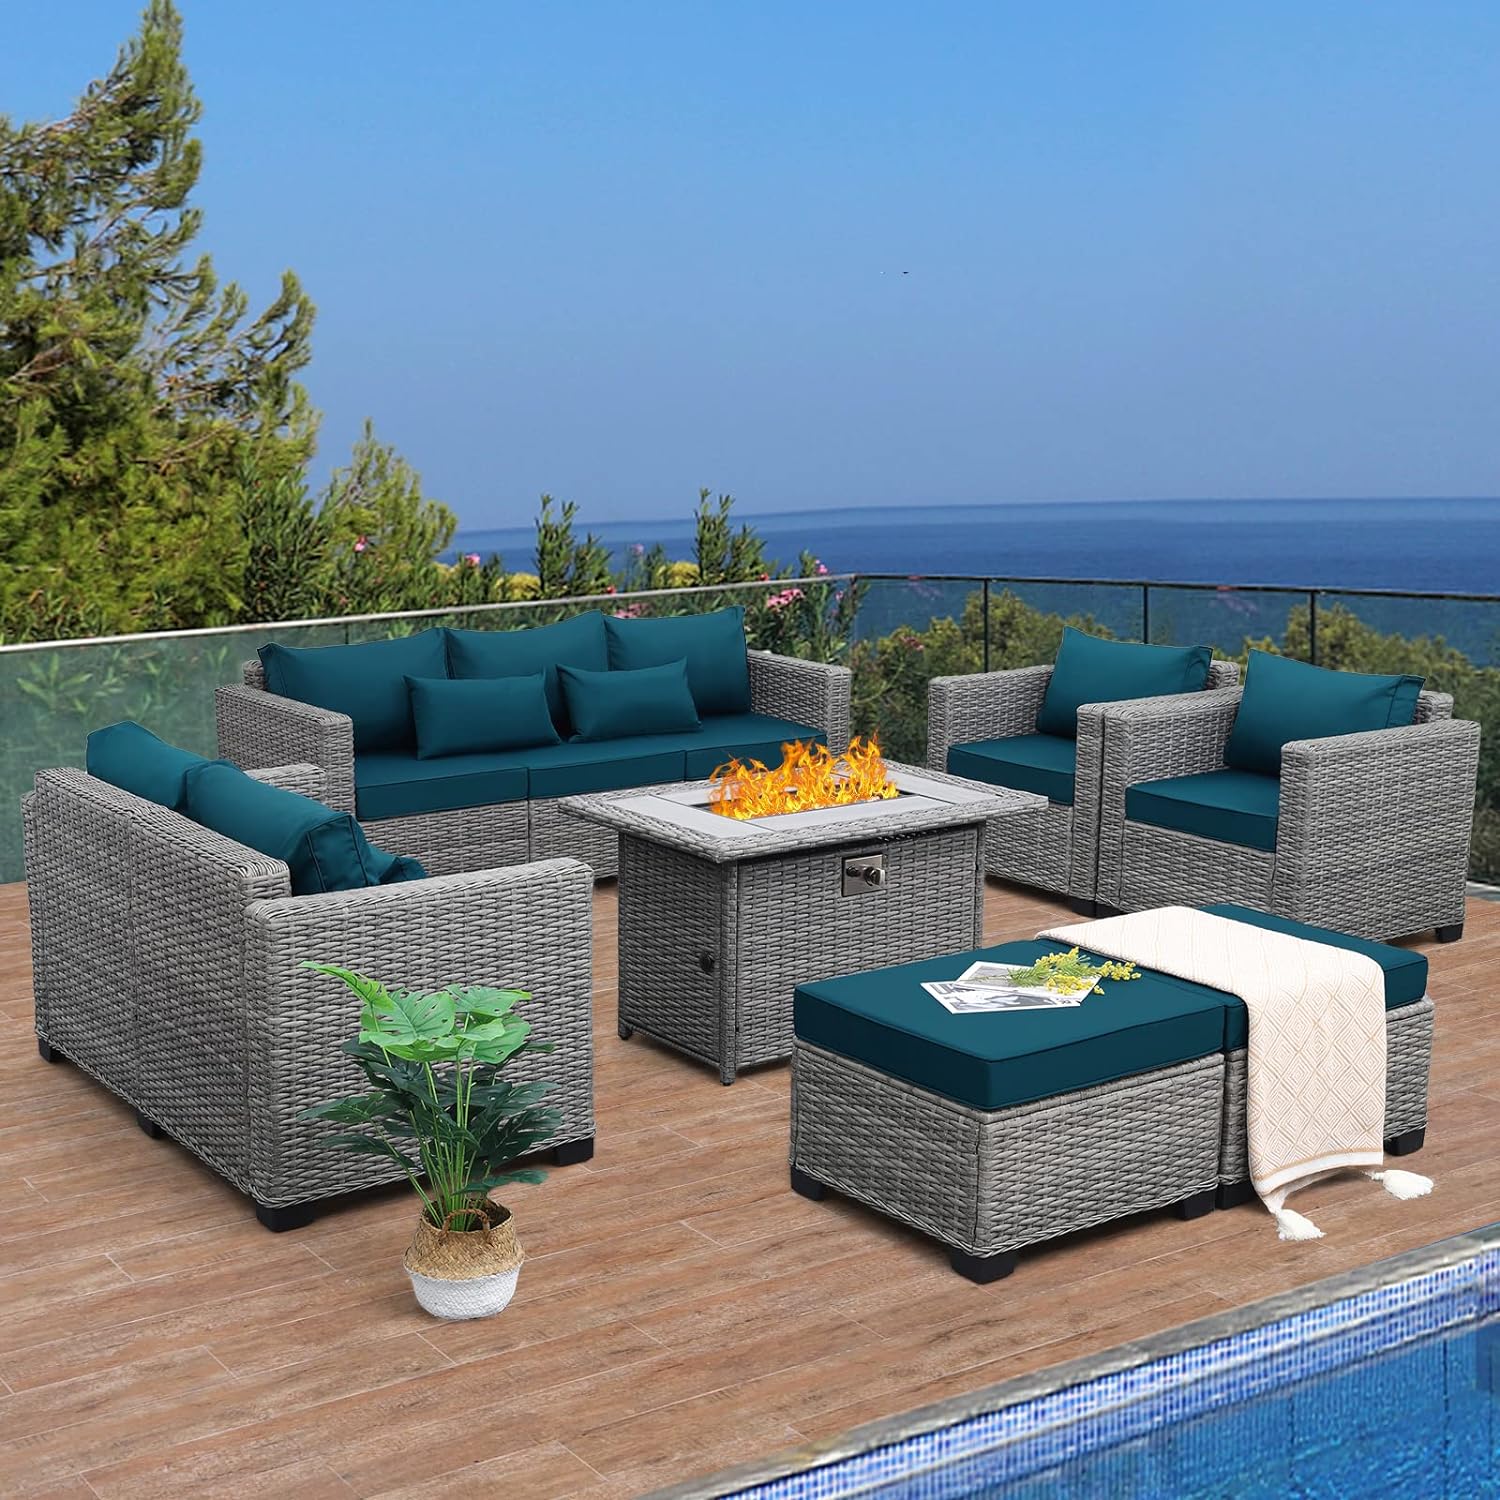 Patio Furniture Set with 45-Inch Fire Pit 7-Piece Outdoor Furniture Sets Patio Couch Outdoor Chairs 60000 BTU Wicker Propane Fire Pit Table No-Slip Cushions and Waterproof Covers, Peacock Blue